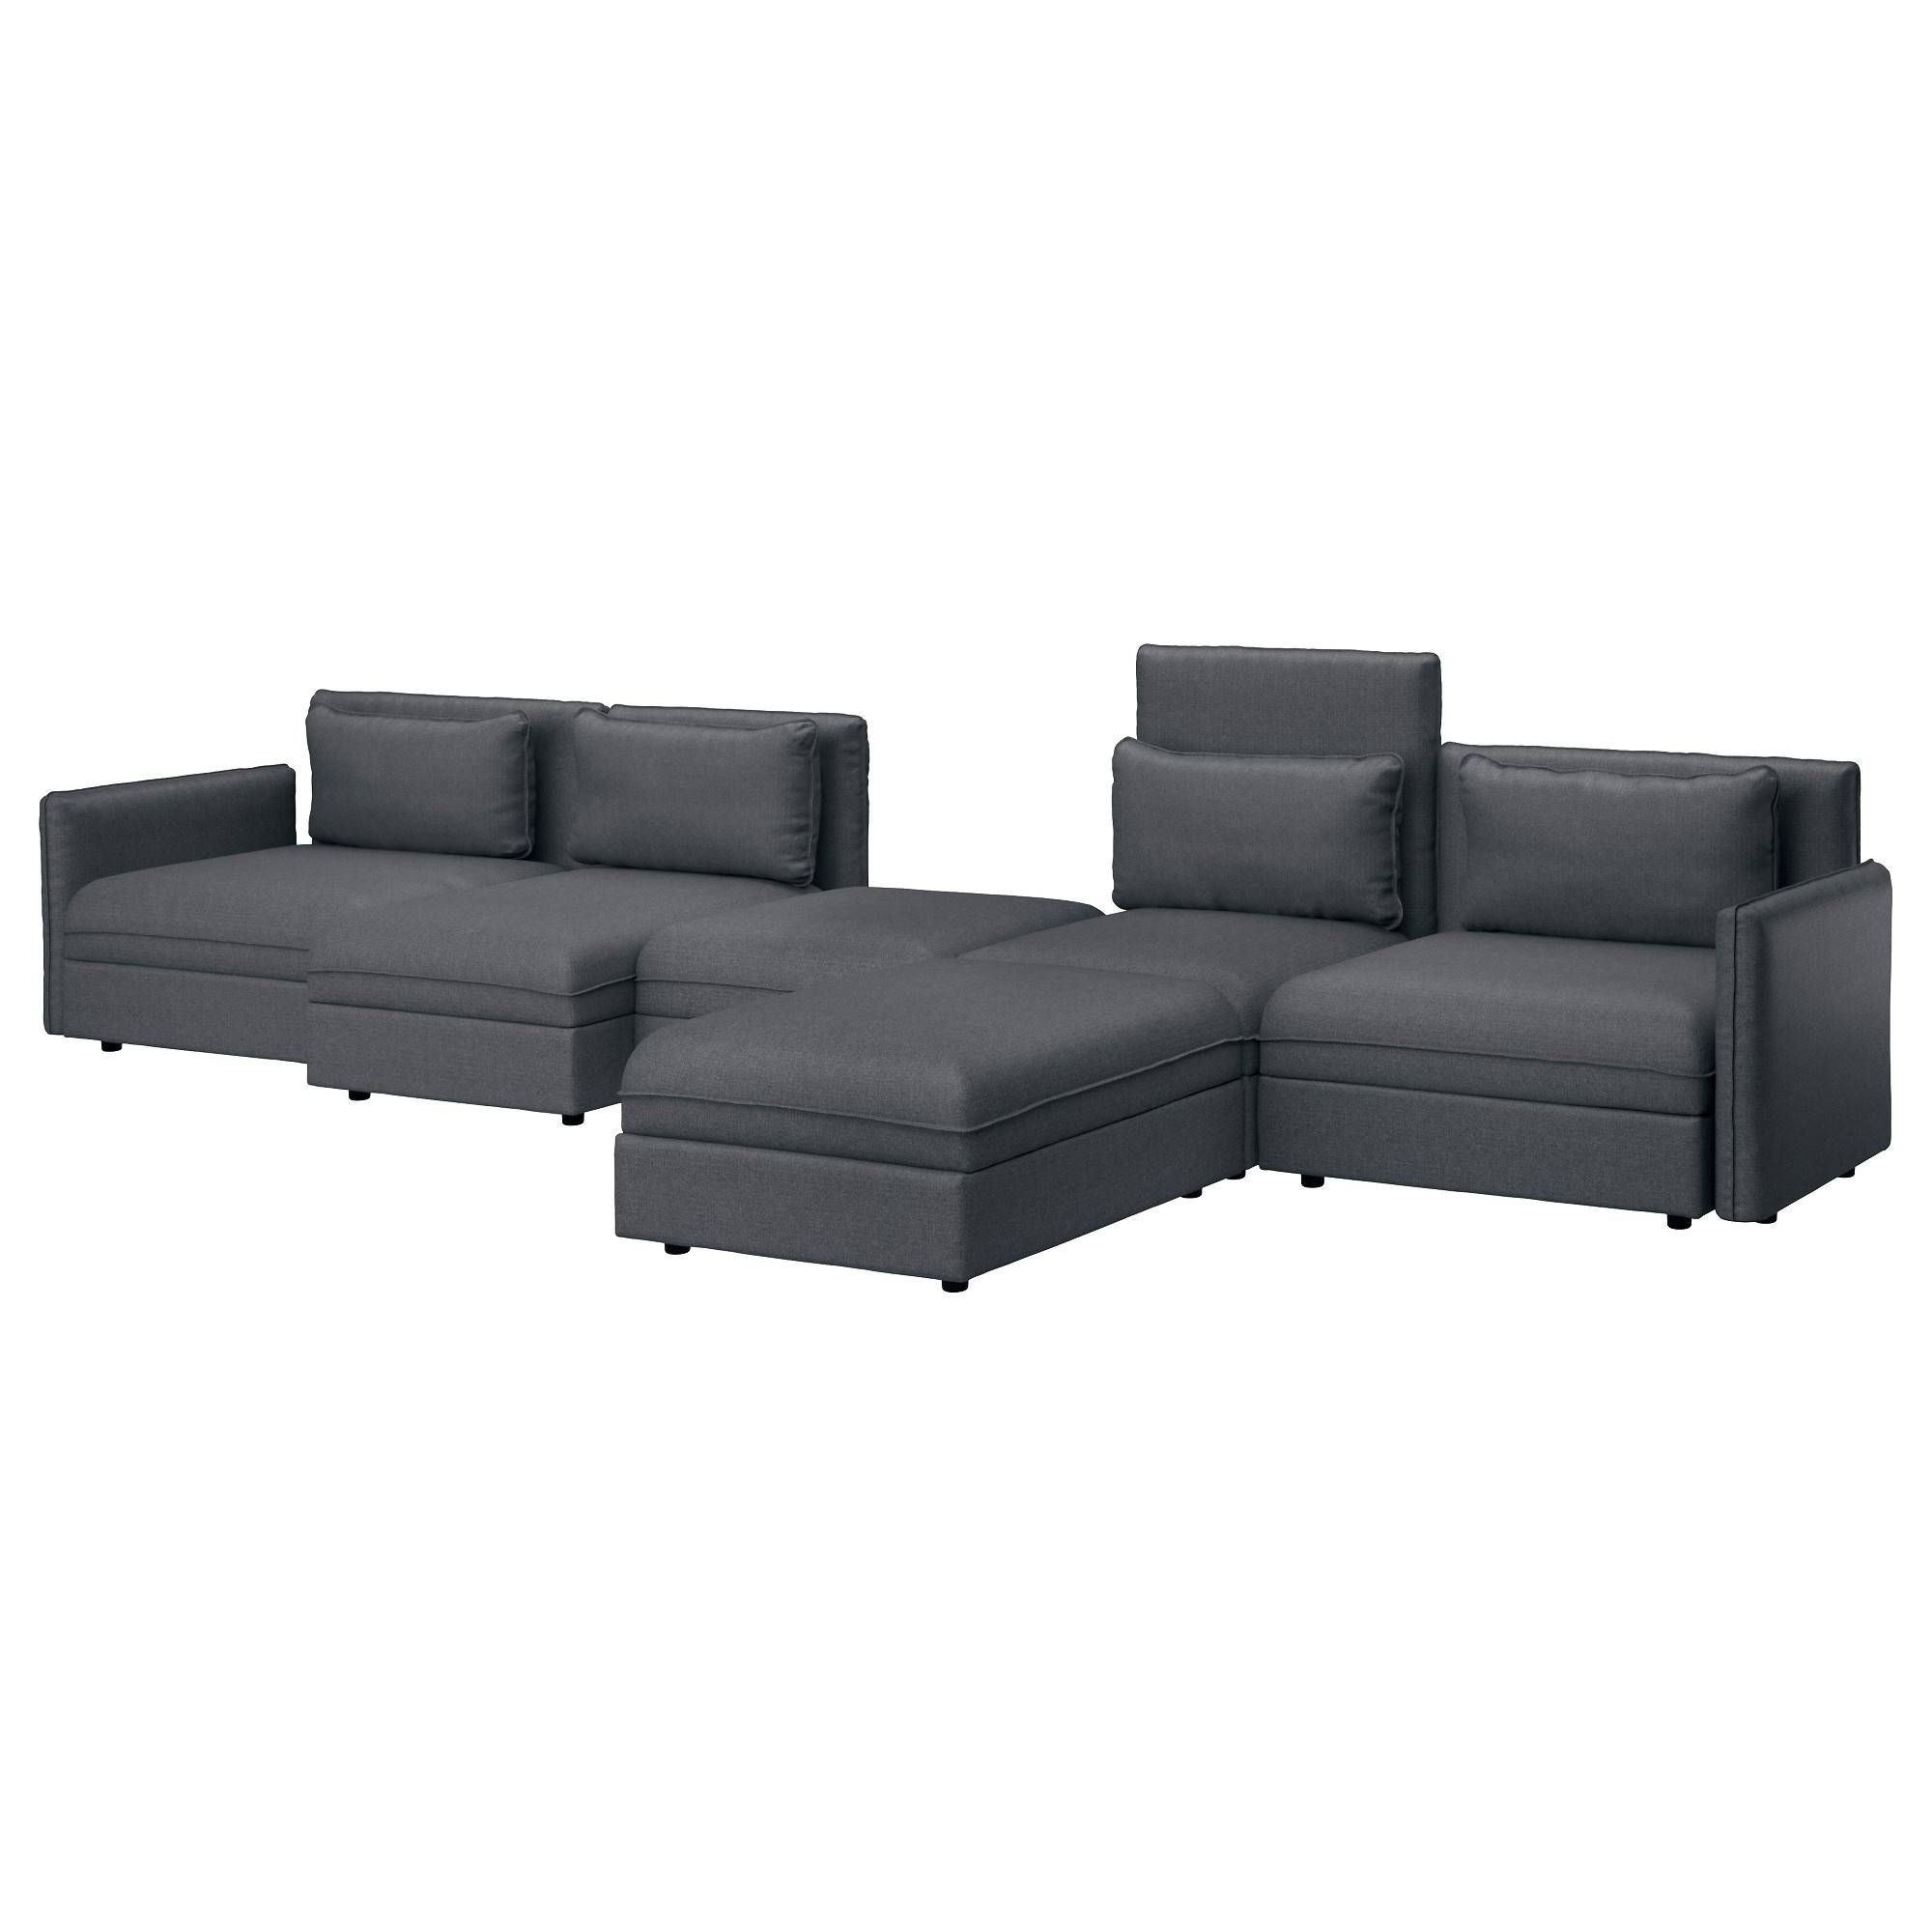 Sectional Sofas & Couches – Ikea Intended For Small 2 Piece Sectional Sofas (View 21 of 30)